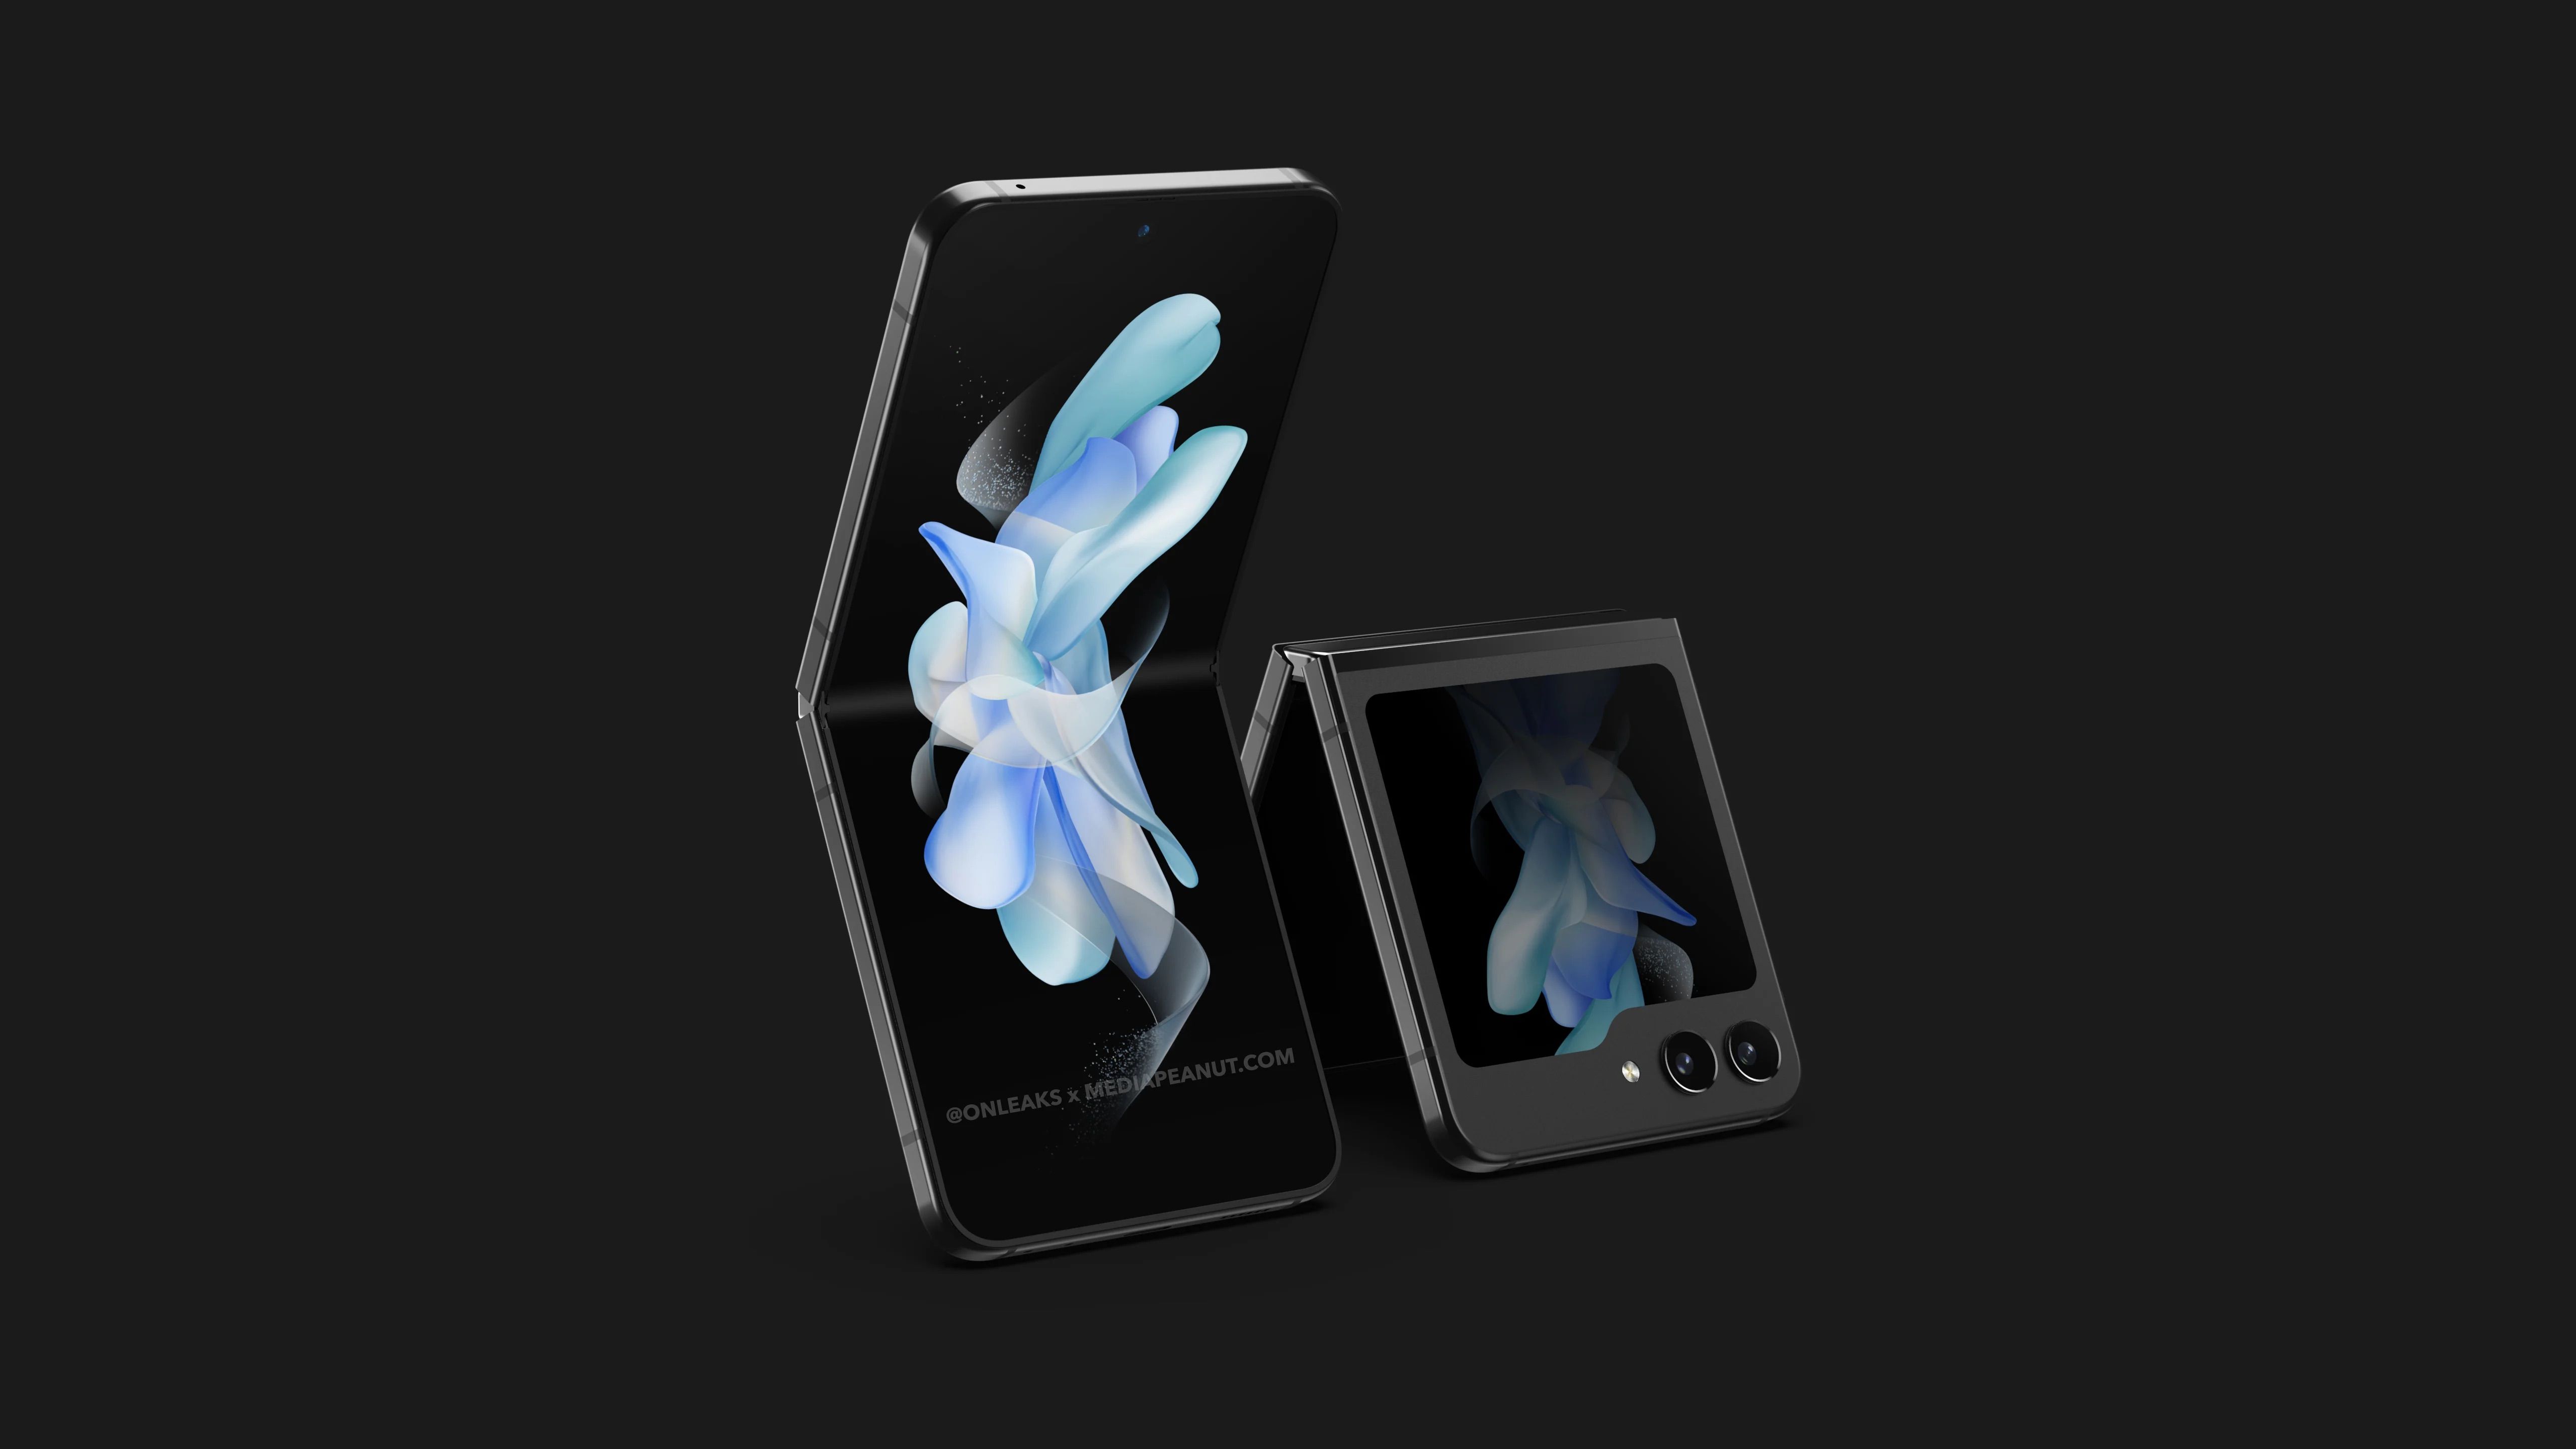 Samsung Galaxy Z Flip 5 in pairs, one showing the foldable display and the other showing the new outer cover display 